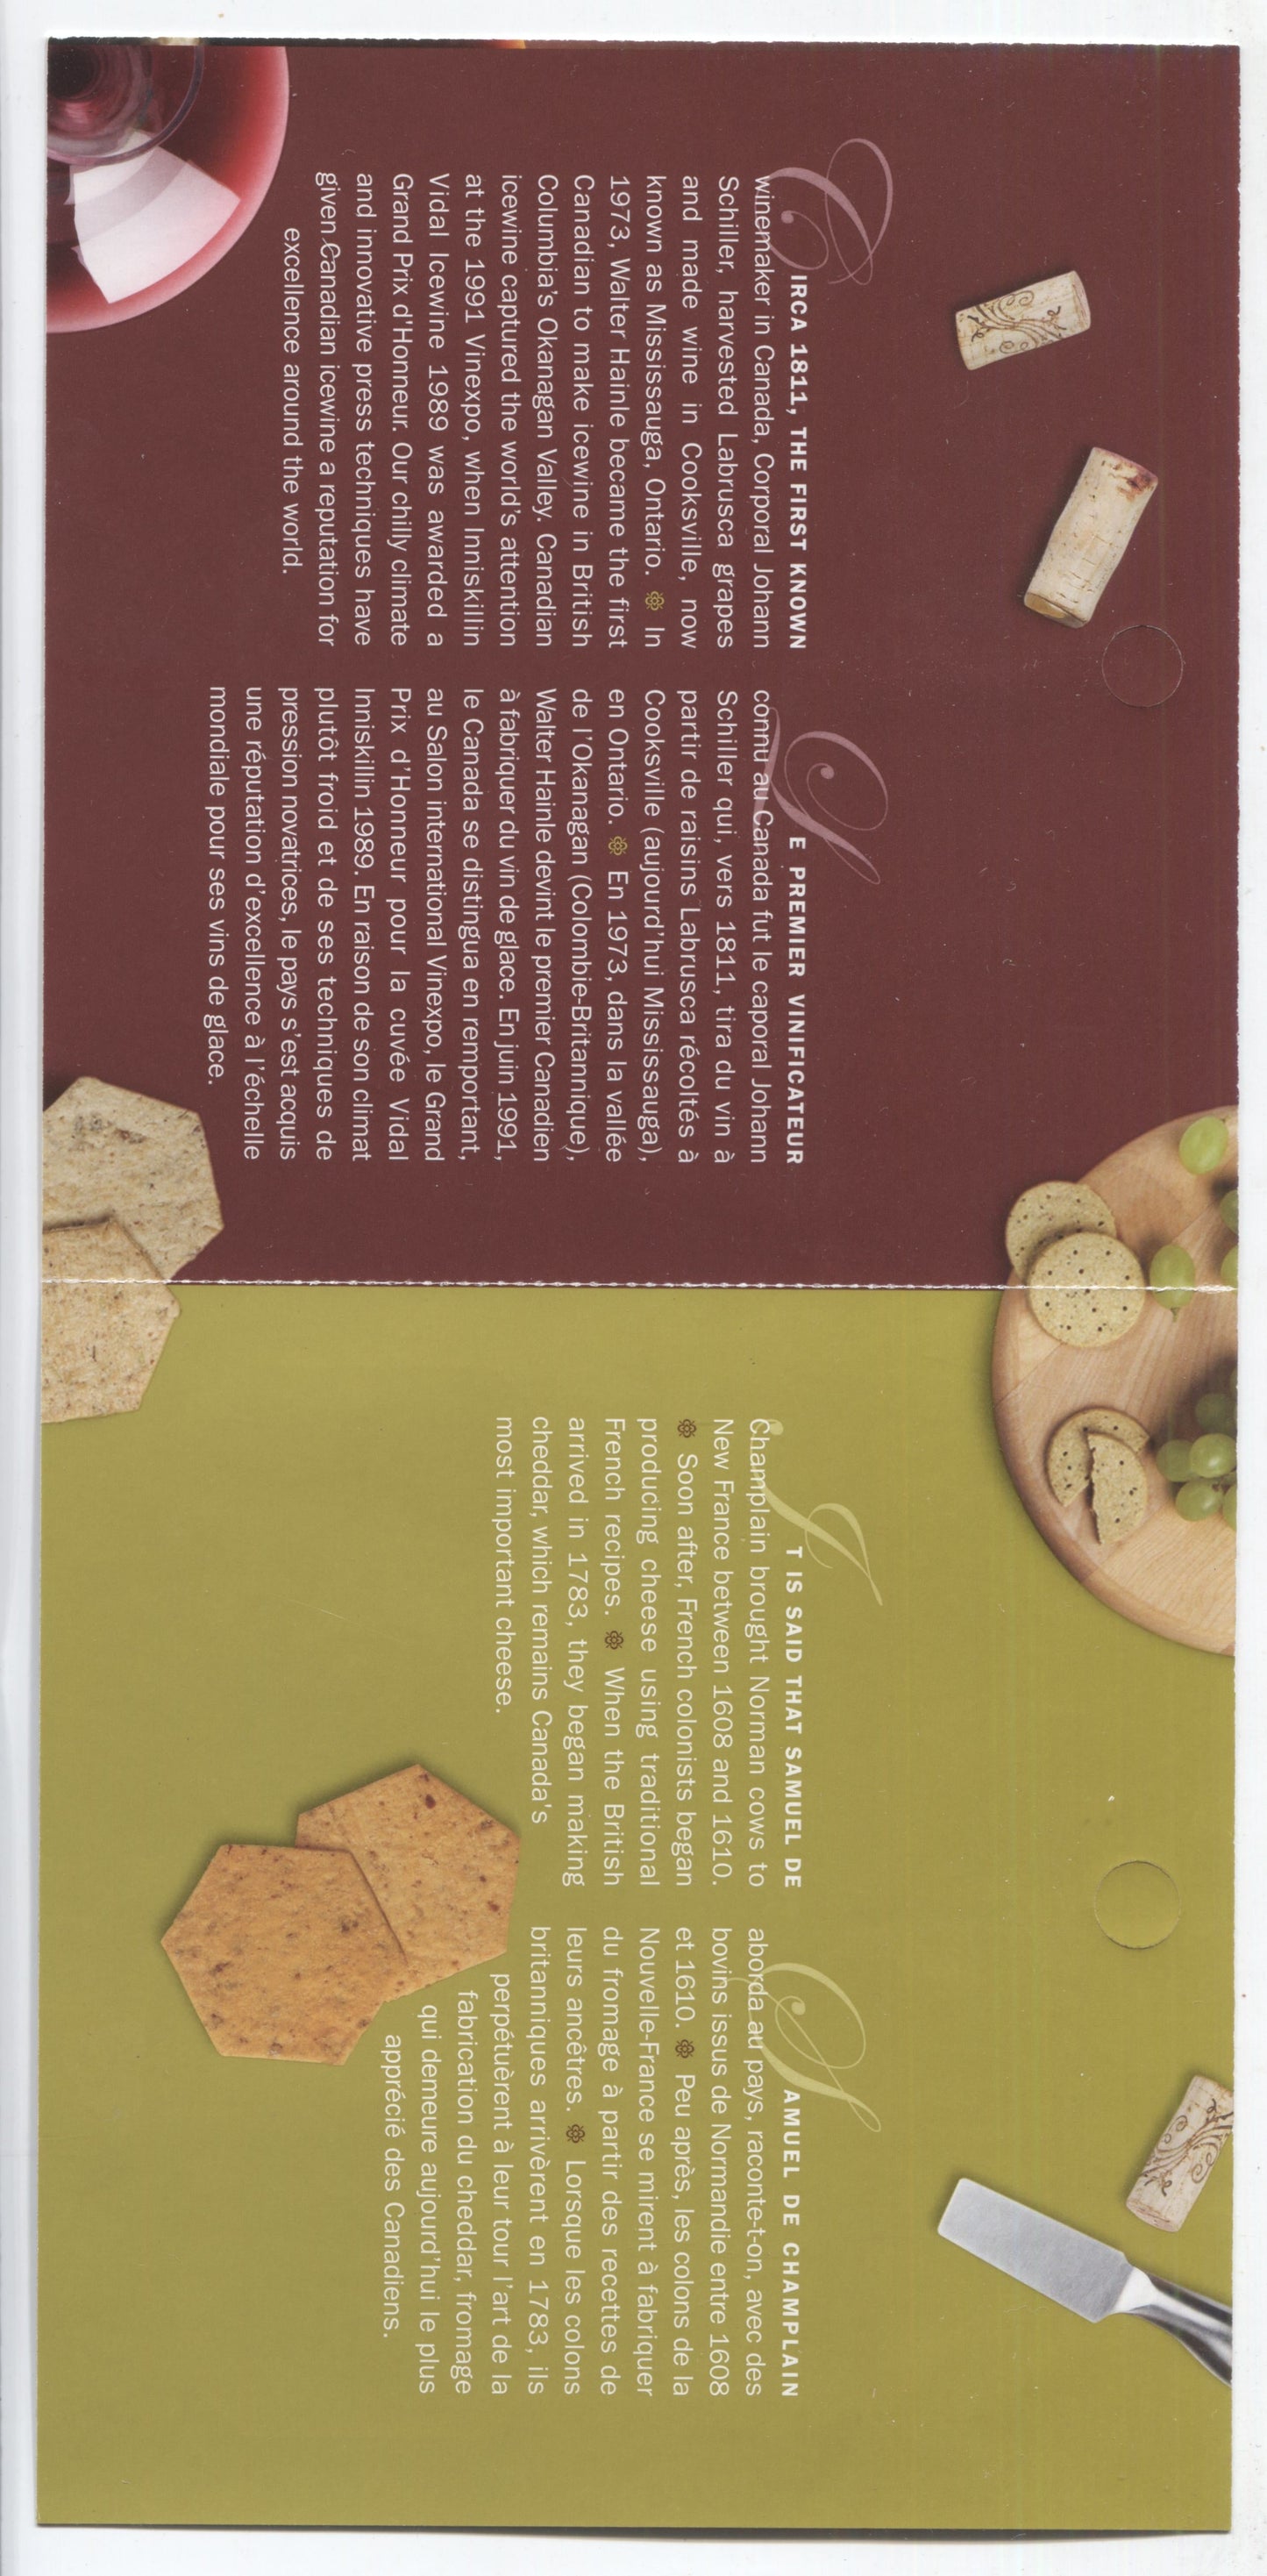 Canada #BK333 2006 Wine and Cheese Issue, Complete $4.08 Booklet, Tullis Russell Coatings Paper, Dead Paper, 4 mm GT-4 Tagging